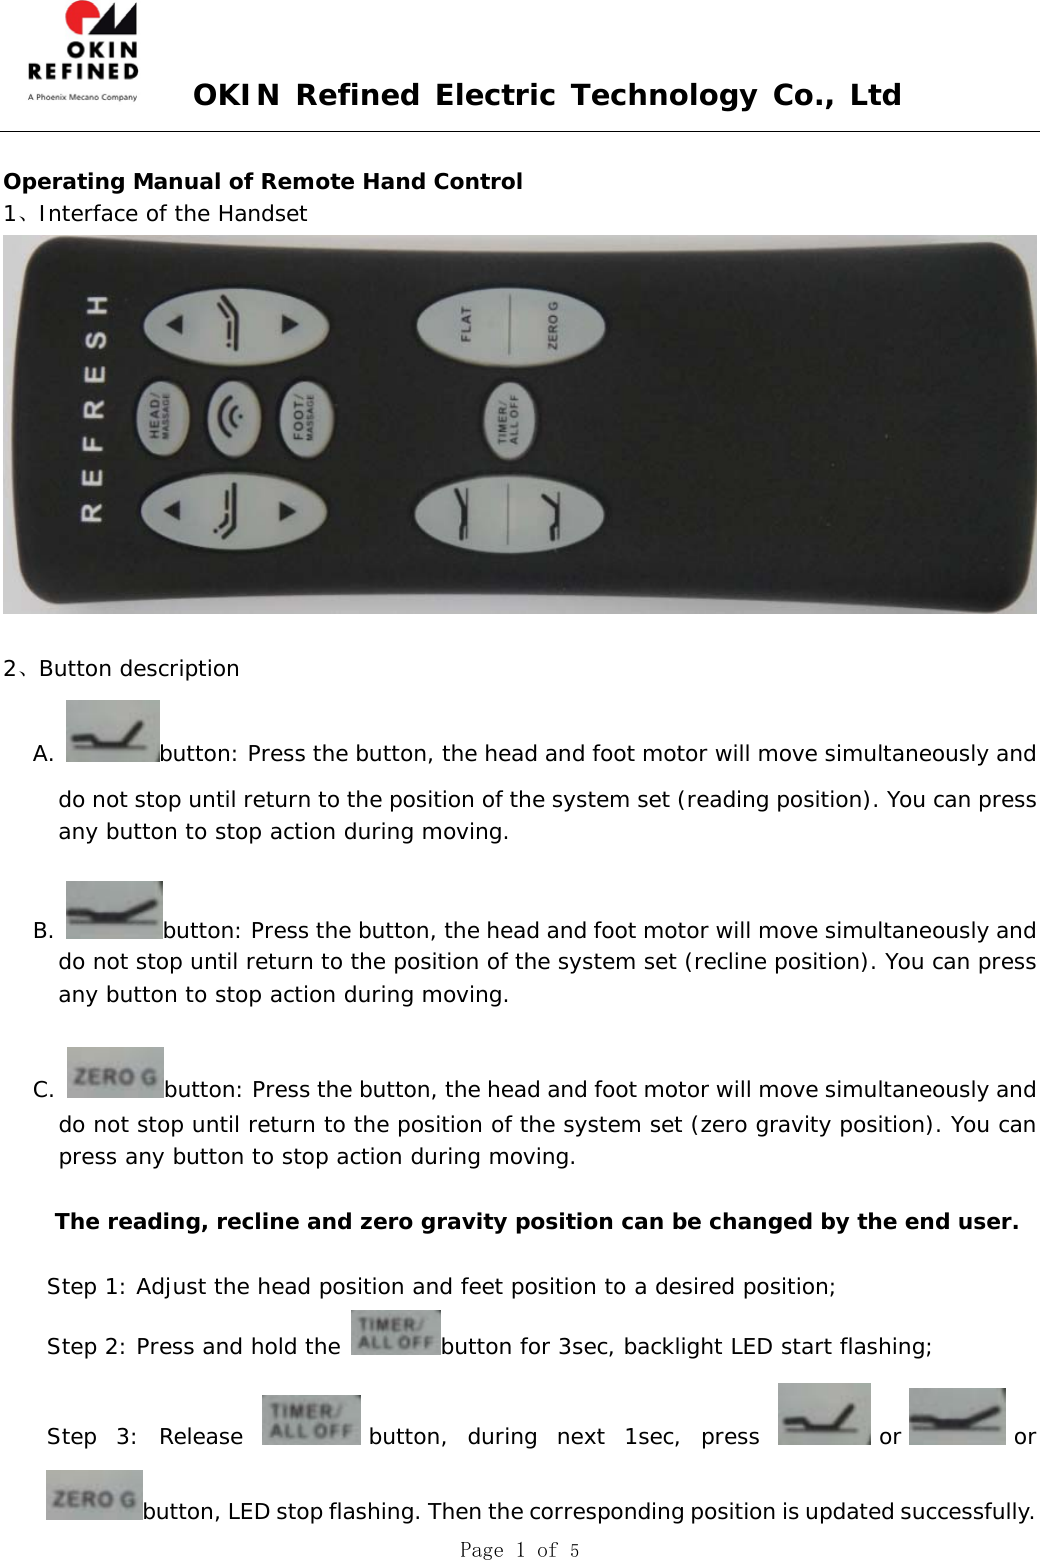  OKIN Refined Electric Technology Co., Ltd  Page 1 of 5   Operating Manual of Remote Hand Control  1、Interface of the Handset    2、Button description  A.  button: Press the button, the head and foot motor will move simultaneously and do not stop until return to the position of the system set (reading position). You can press any button to stop action during moving.          B.  button: Press the button, the head and foot motor will move simultaneously and do not stop until return to the position of the system set (recline position). You can press any button to stop action during moving.   C.  button: Press the button, the head and foot motor will move simultaneously and do not stop until return to the position of the system set (zero gravity position). You can press any button to stop action during moving.     The reading, recline and zero gravity position can be changed by the end user.  Step 1: Adjust the head position and feet position to a desired position; Step 2: Press and hold the  button for 3sec, backlight LED start flashing; Step 3: Release  button, during next 1sec, press  or or button, LED stop flashing. Then the corresponding position is updated successfully. 